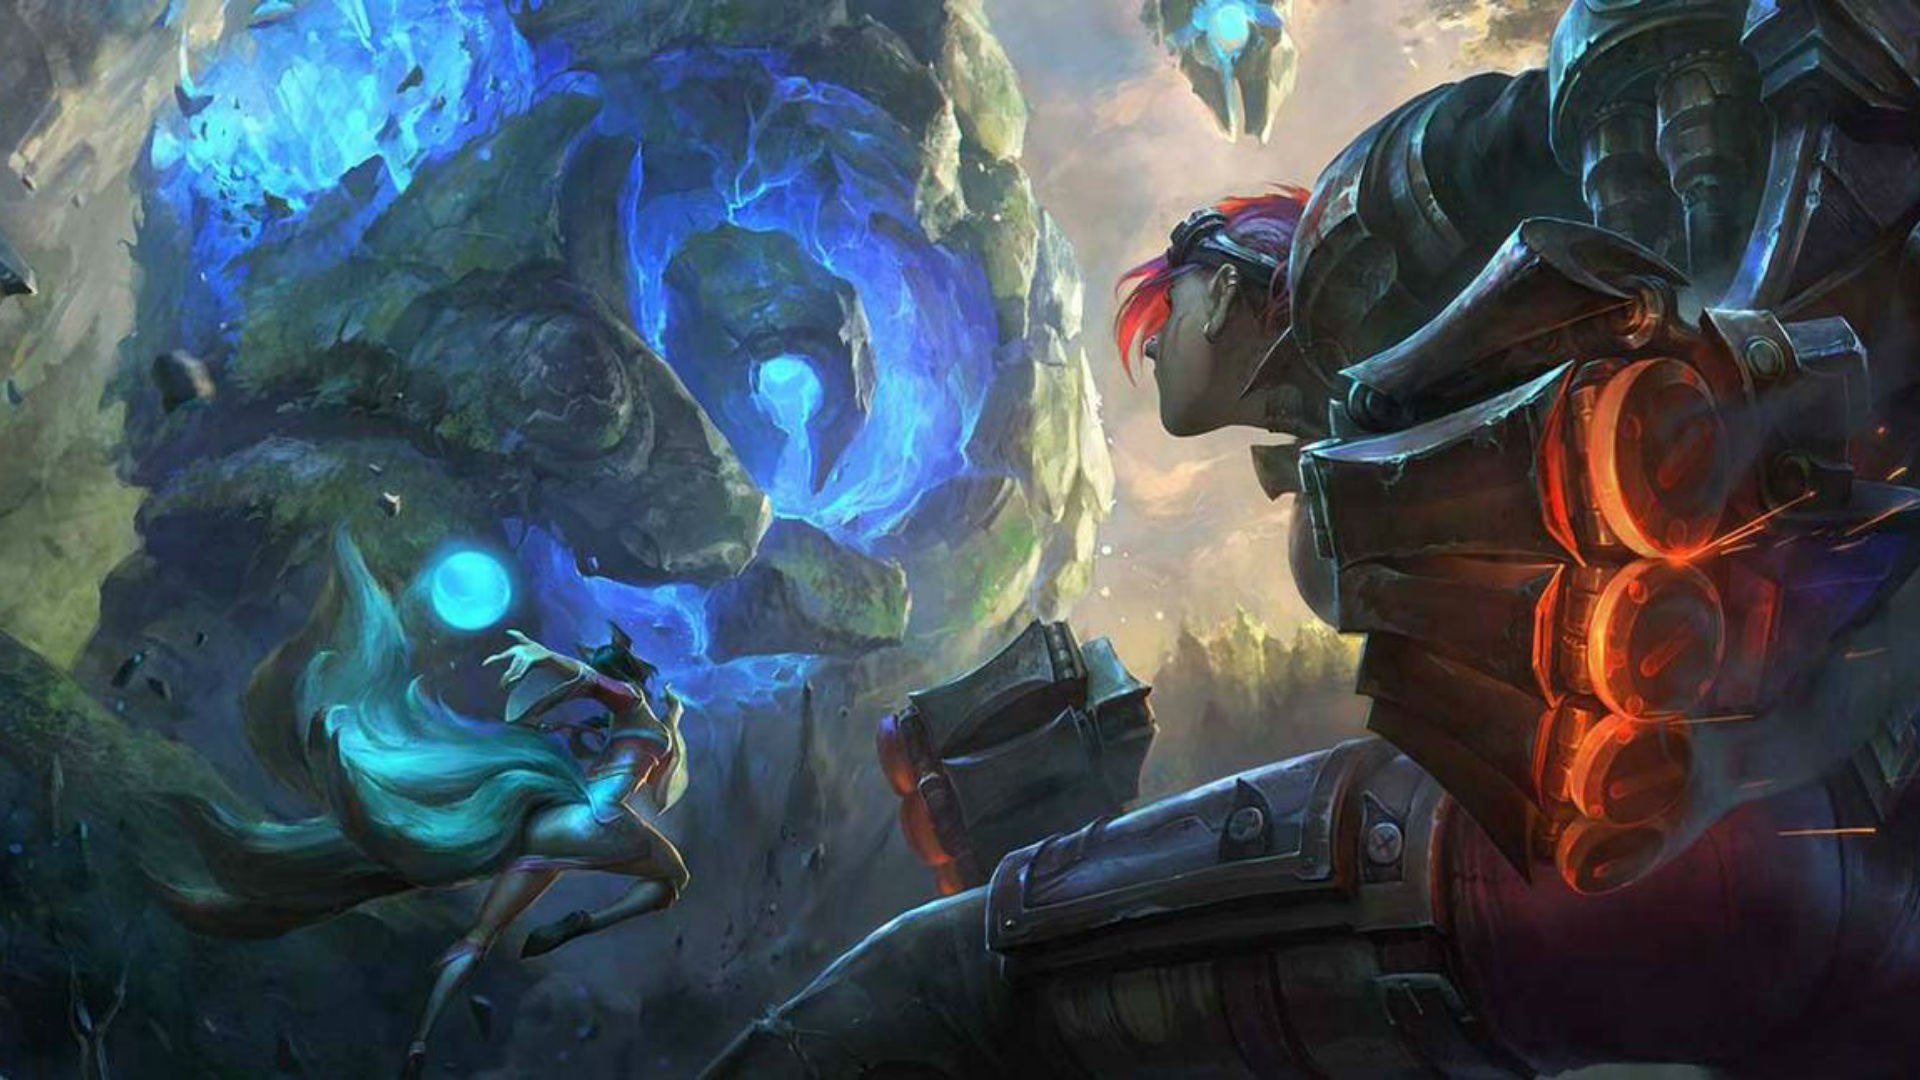 Another League of Legends skin shard is up for grabs with Prime